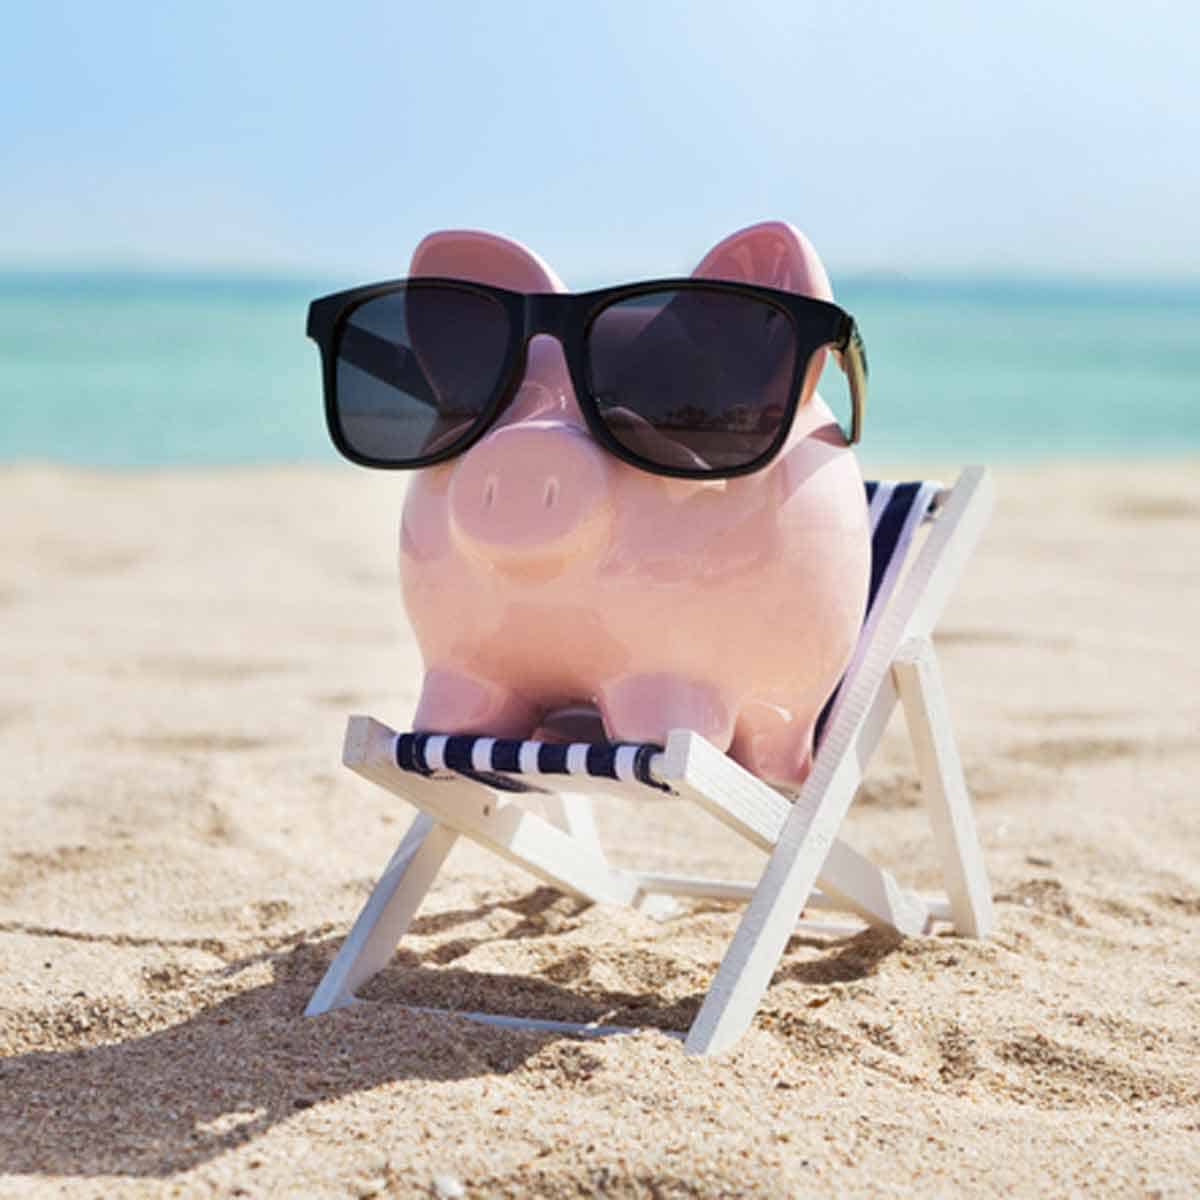 A pink piggy bank wearing sunglasses and relaxing on the beach.